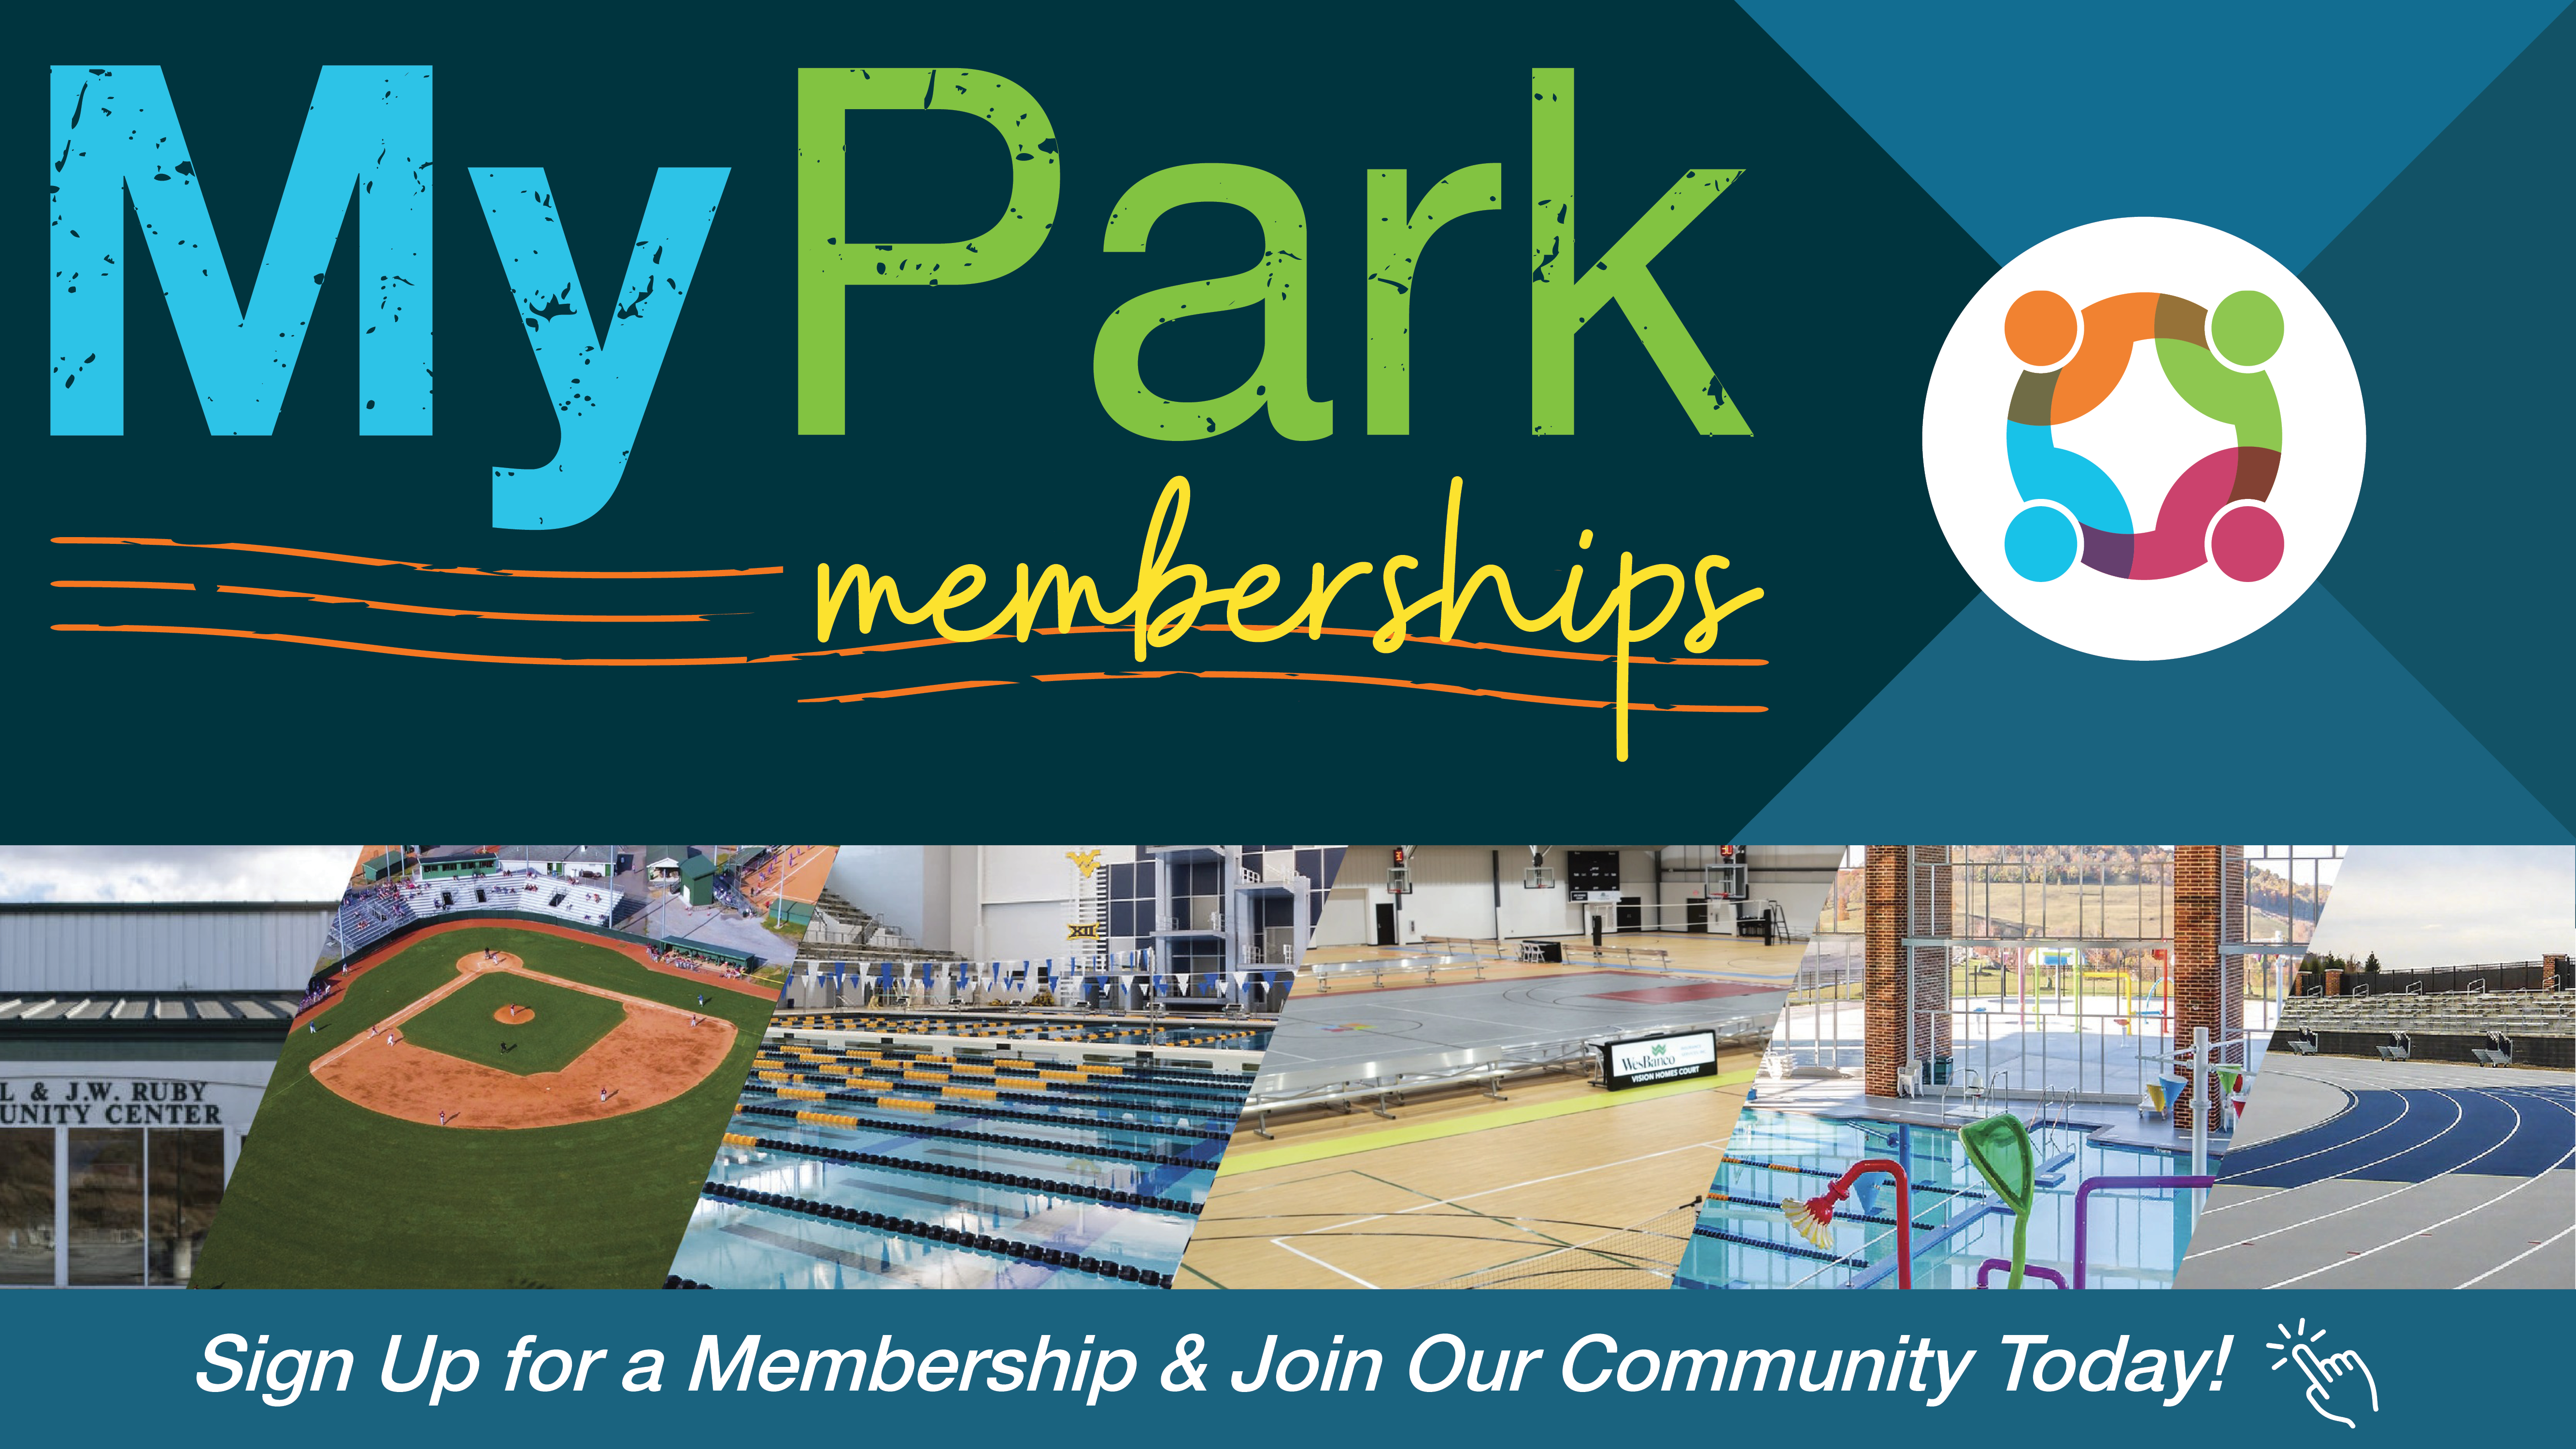 Become a member of Mylan Park today and join our community